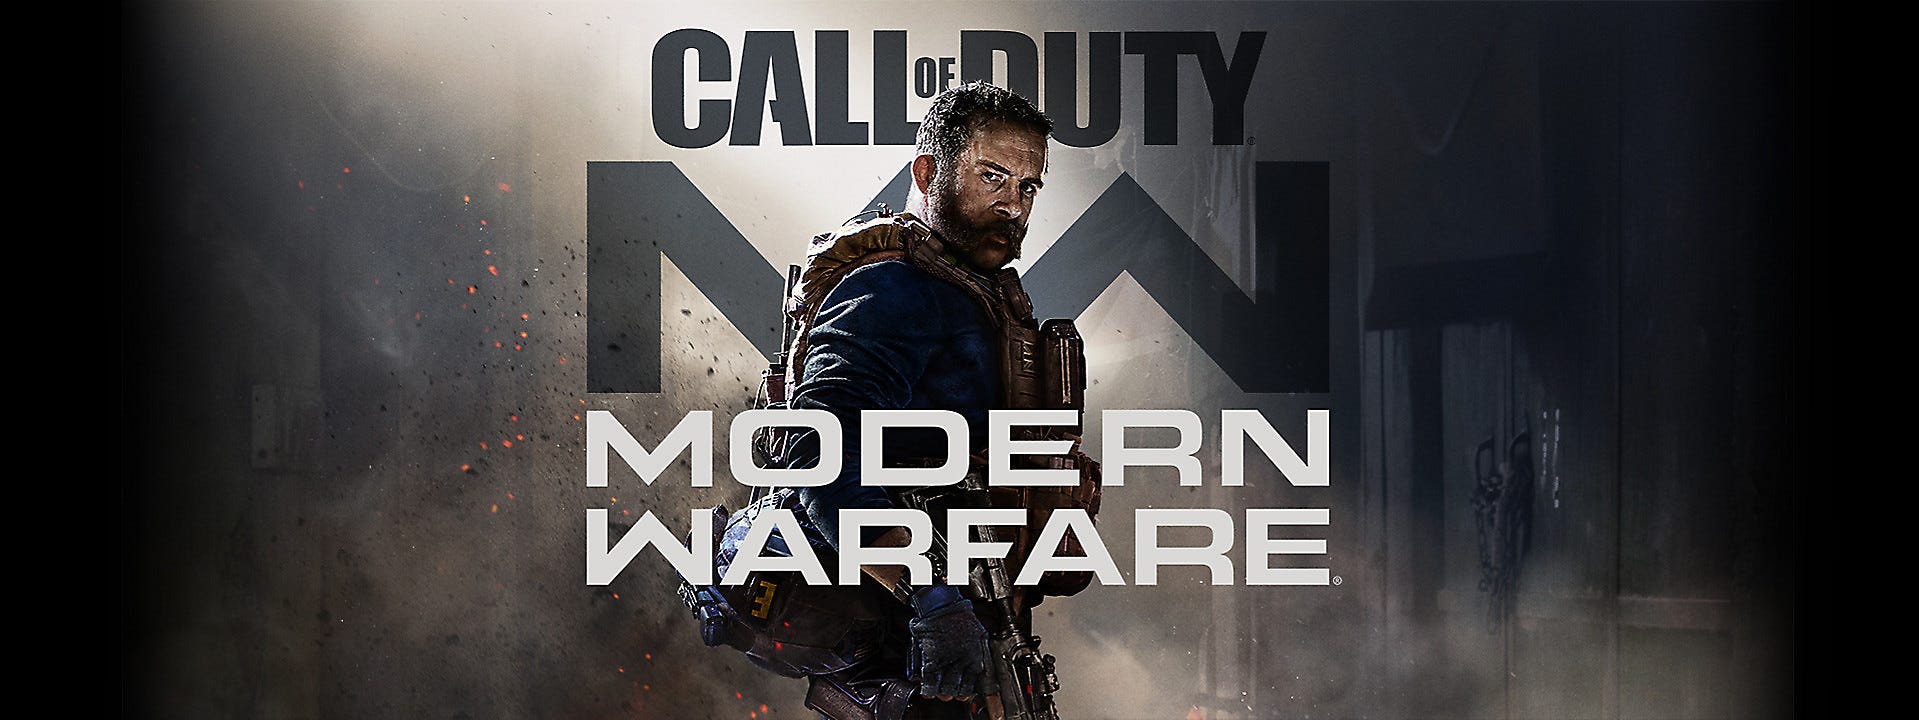 Still Crew Reviews 'Call of Duty: Modern Warfare' with the ... - 